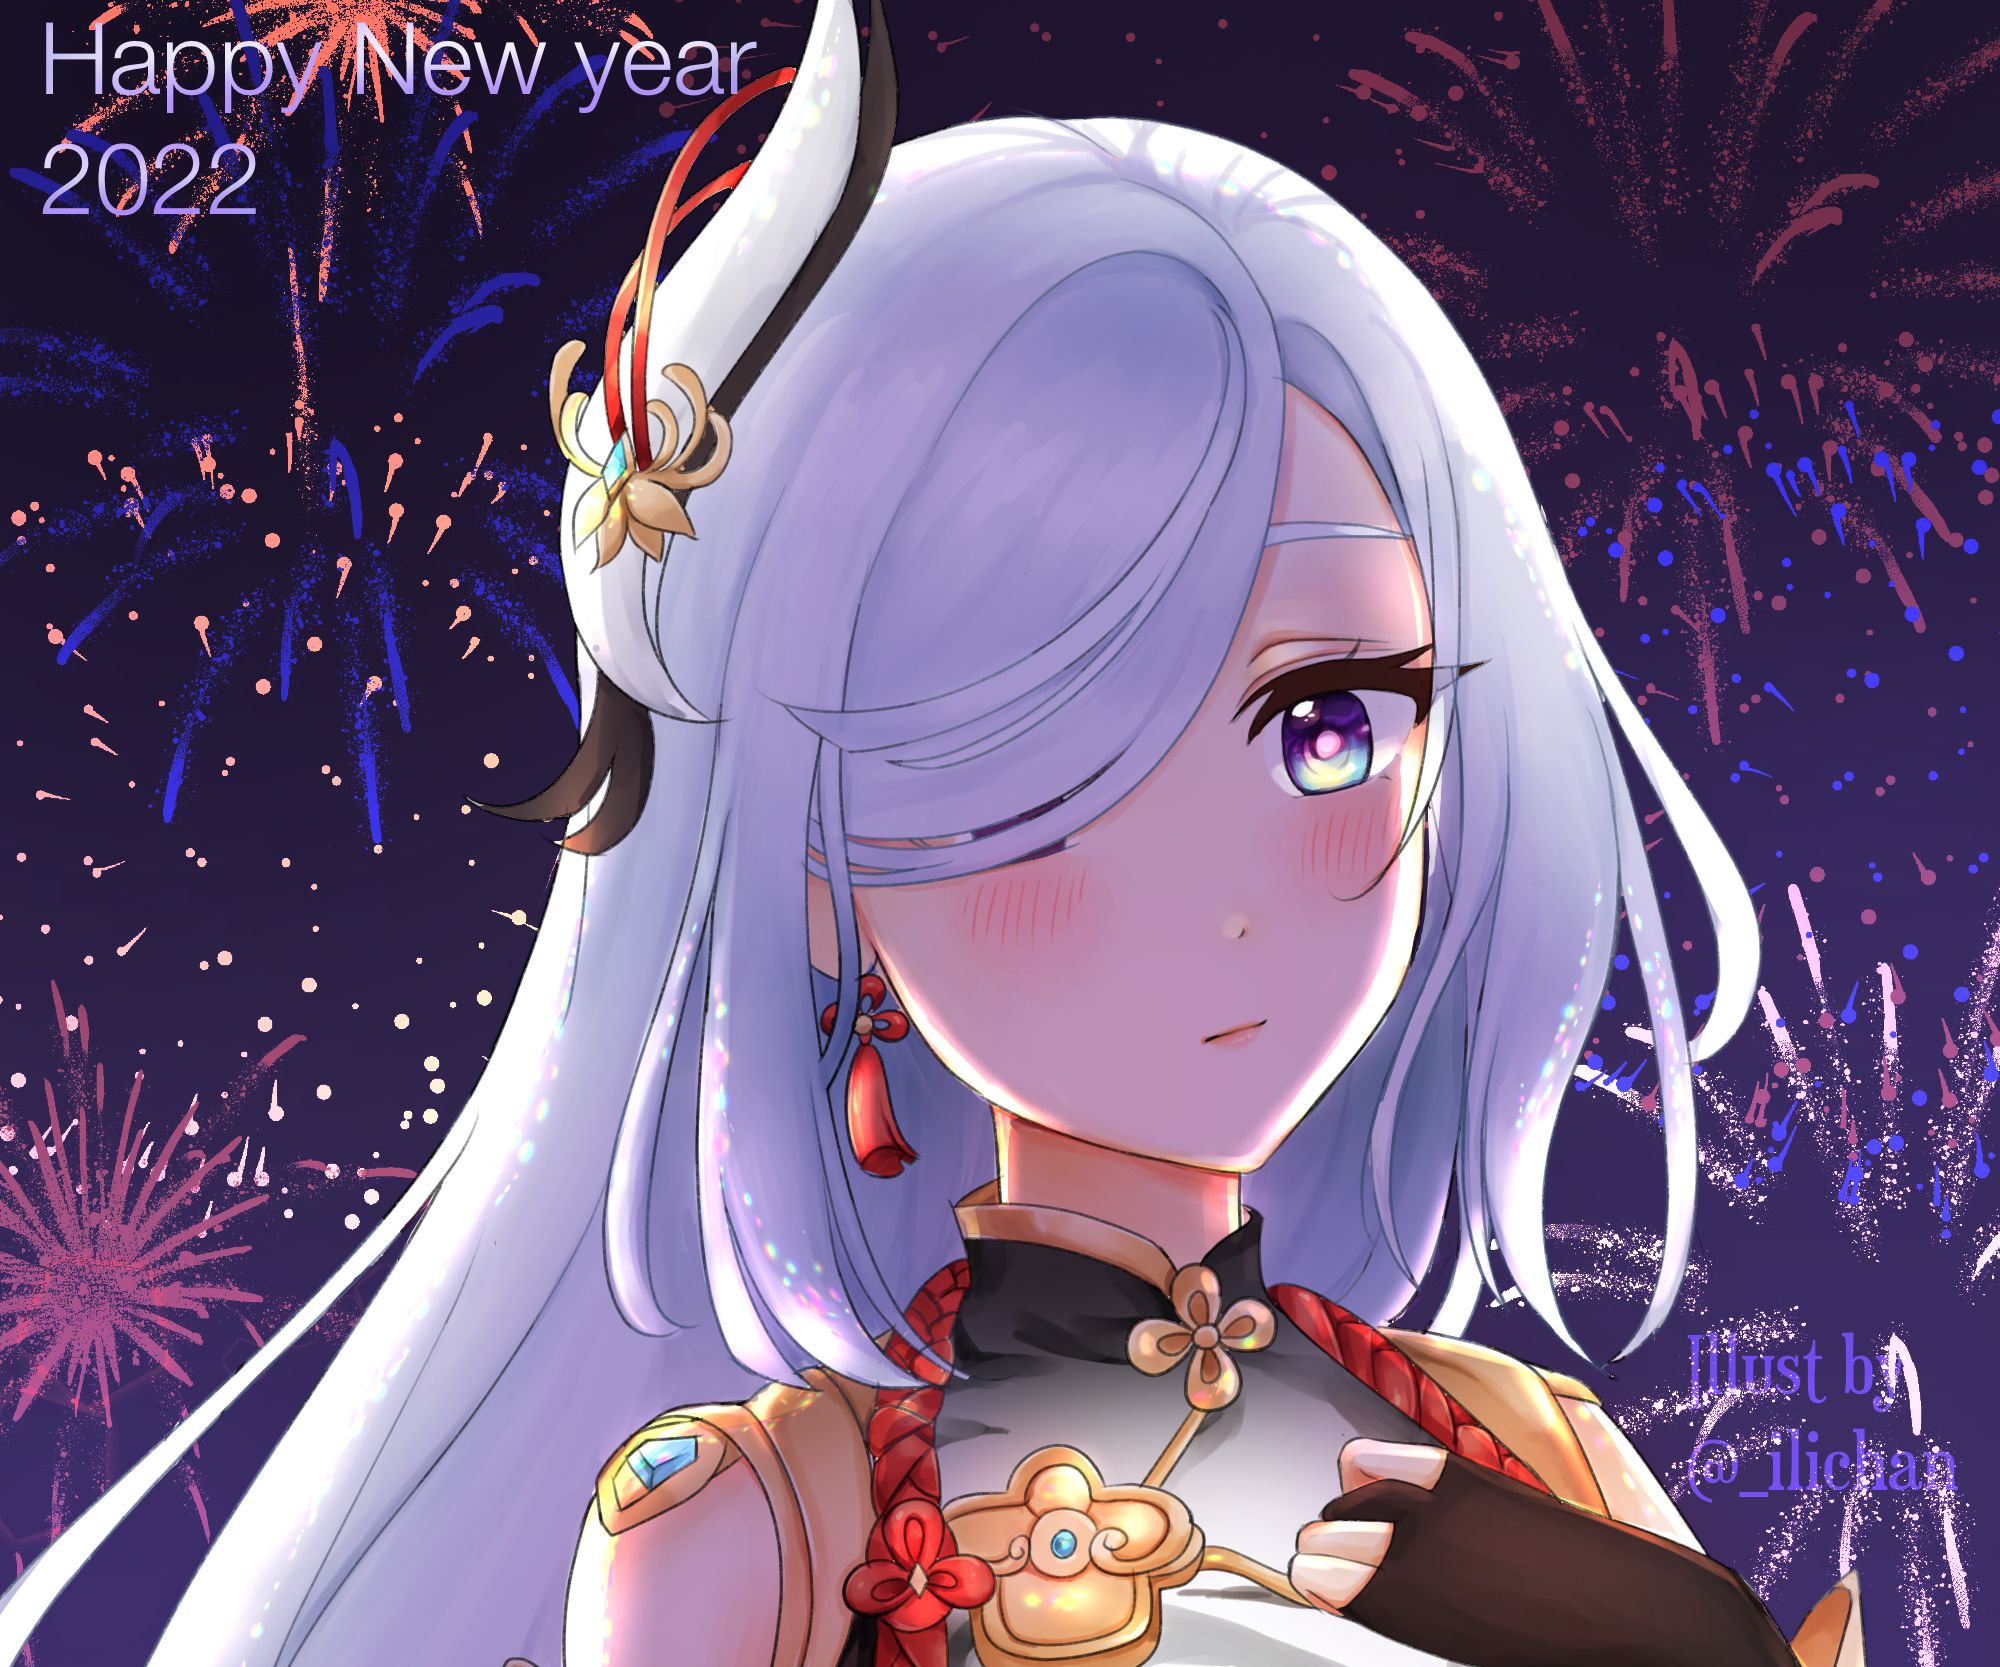 Anime New Year 2020 4K wallpaper download